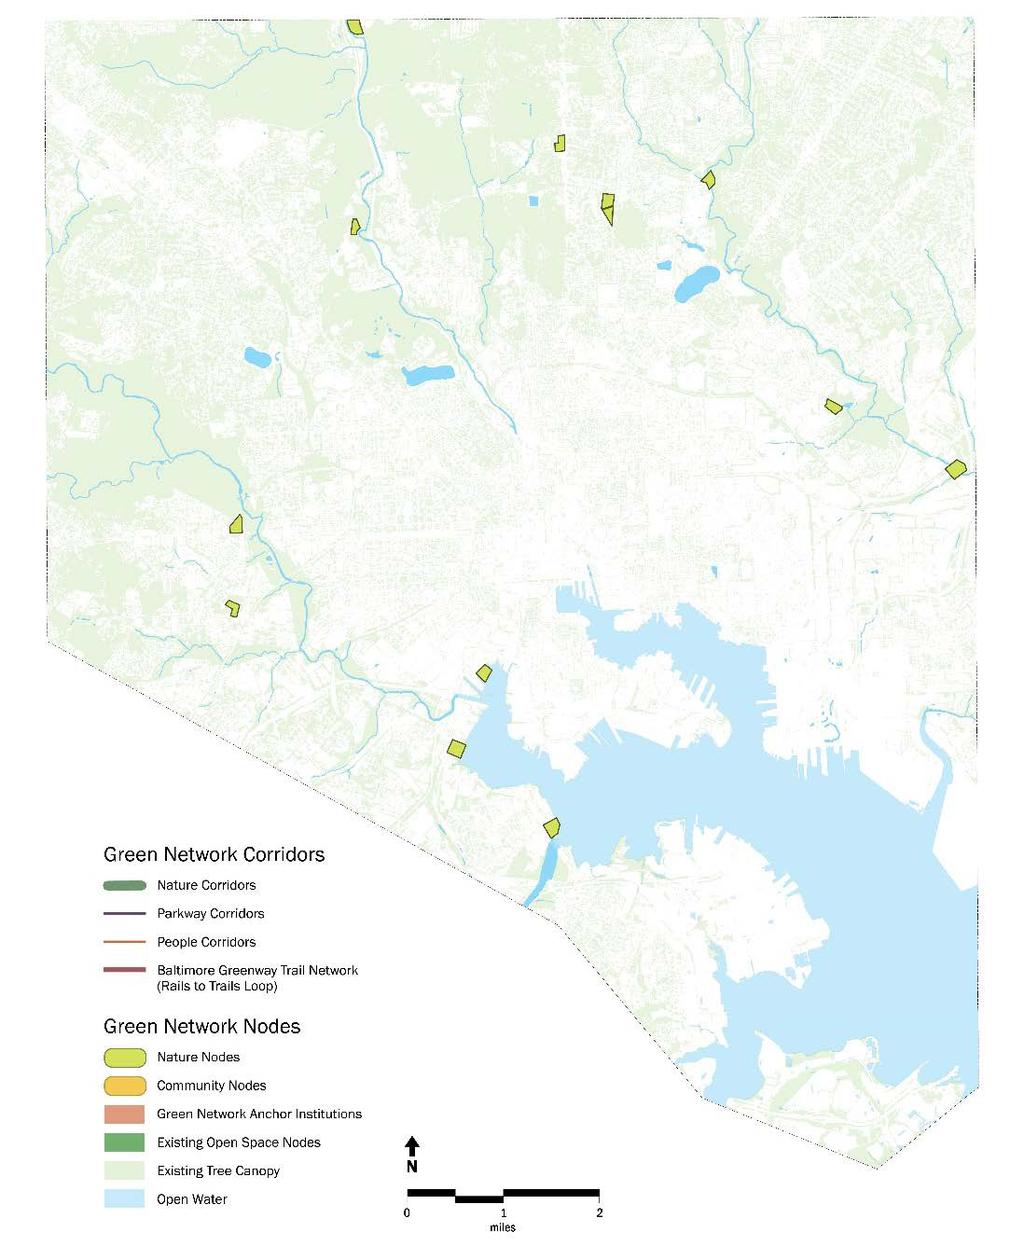 CREATING THE NETWORK NATURE NODES Relatively scarce in a dense urban setting, Nature Nodes are locations for enhancing and expanding habitat in forest patches, floodplain and wetlands near the nature